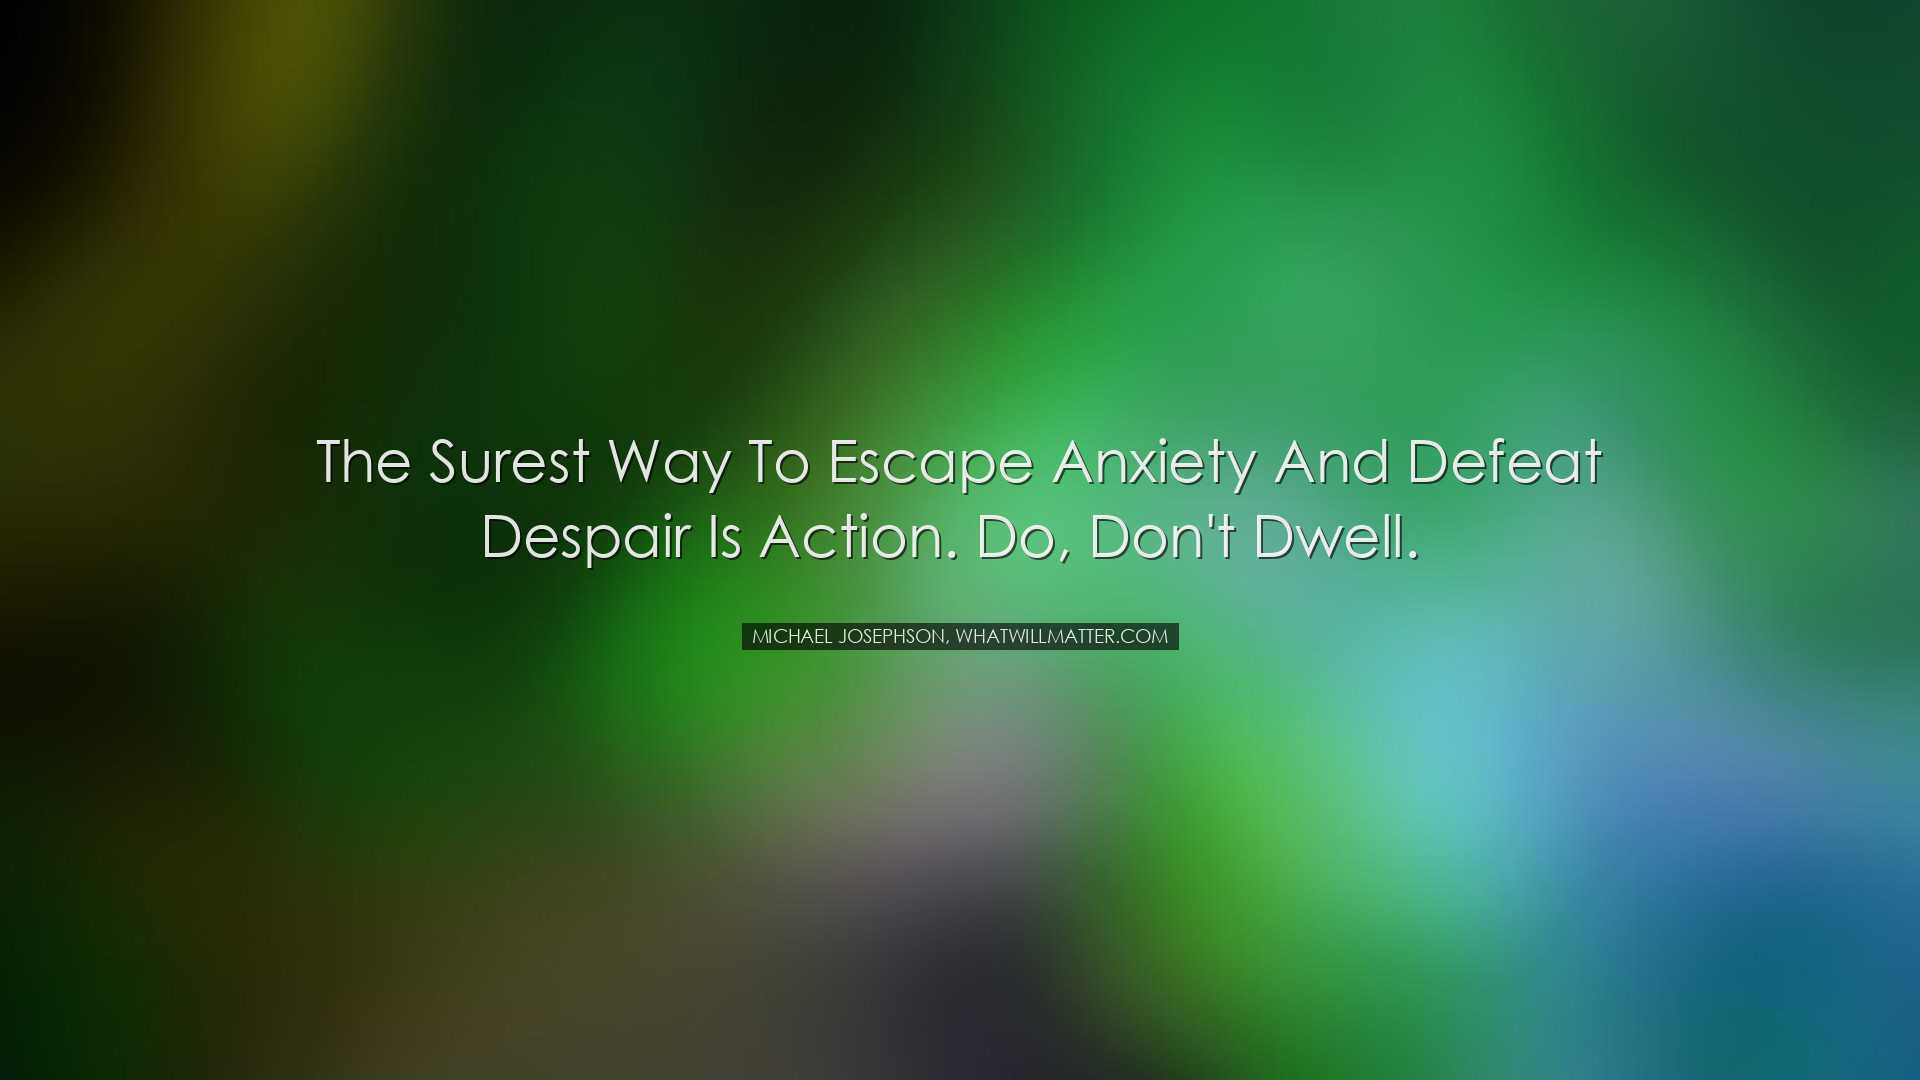 The surest way to escape anxiety and defeat despair is action. Do,